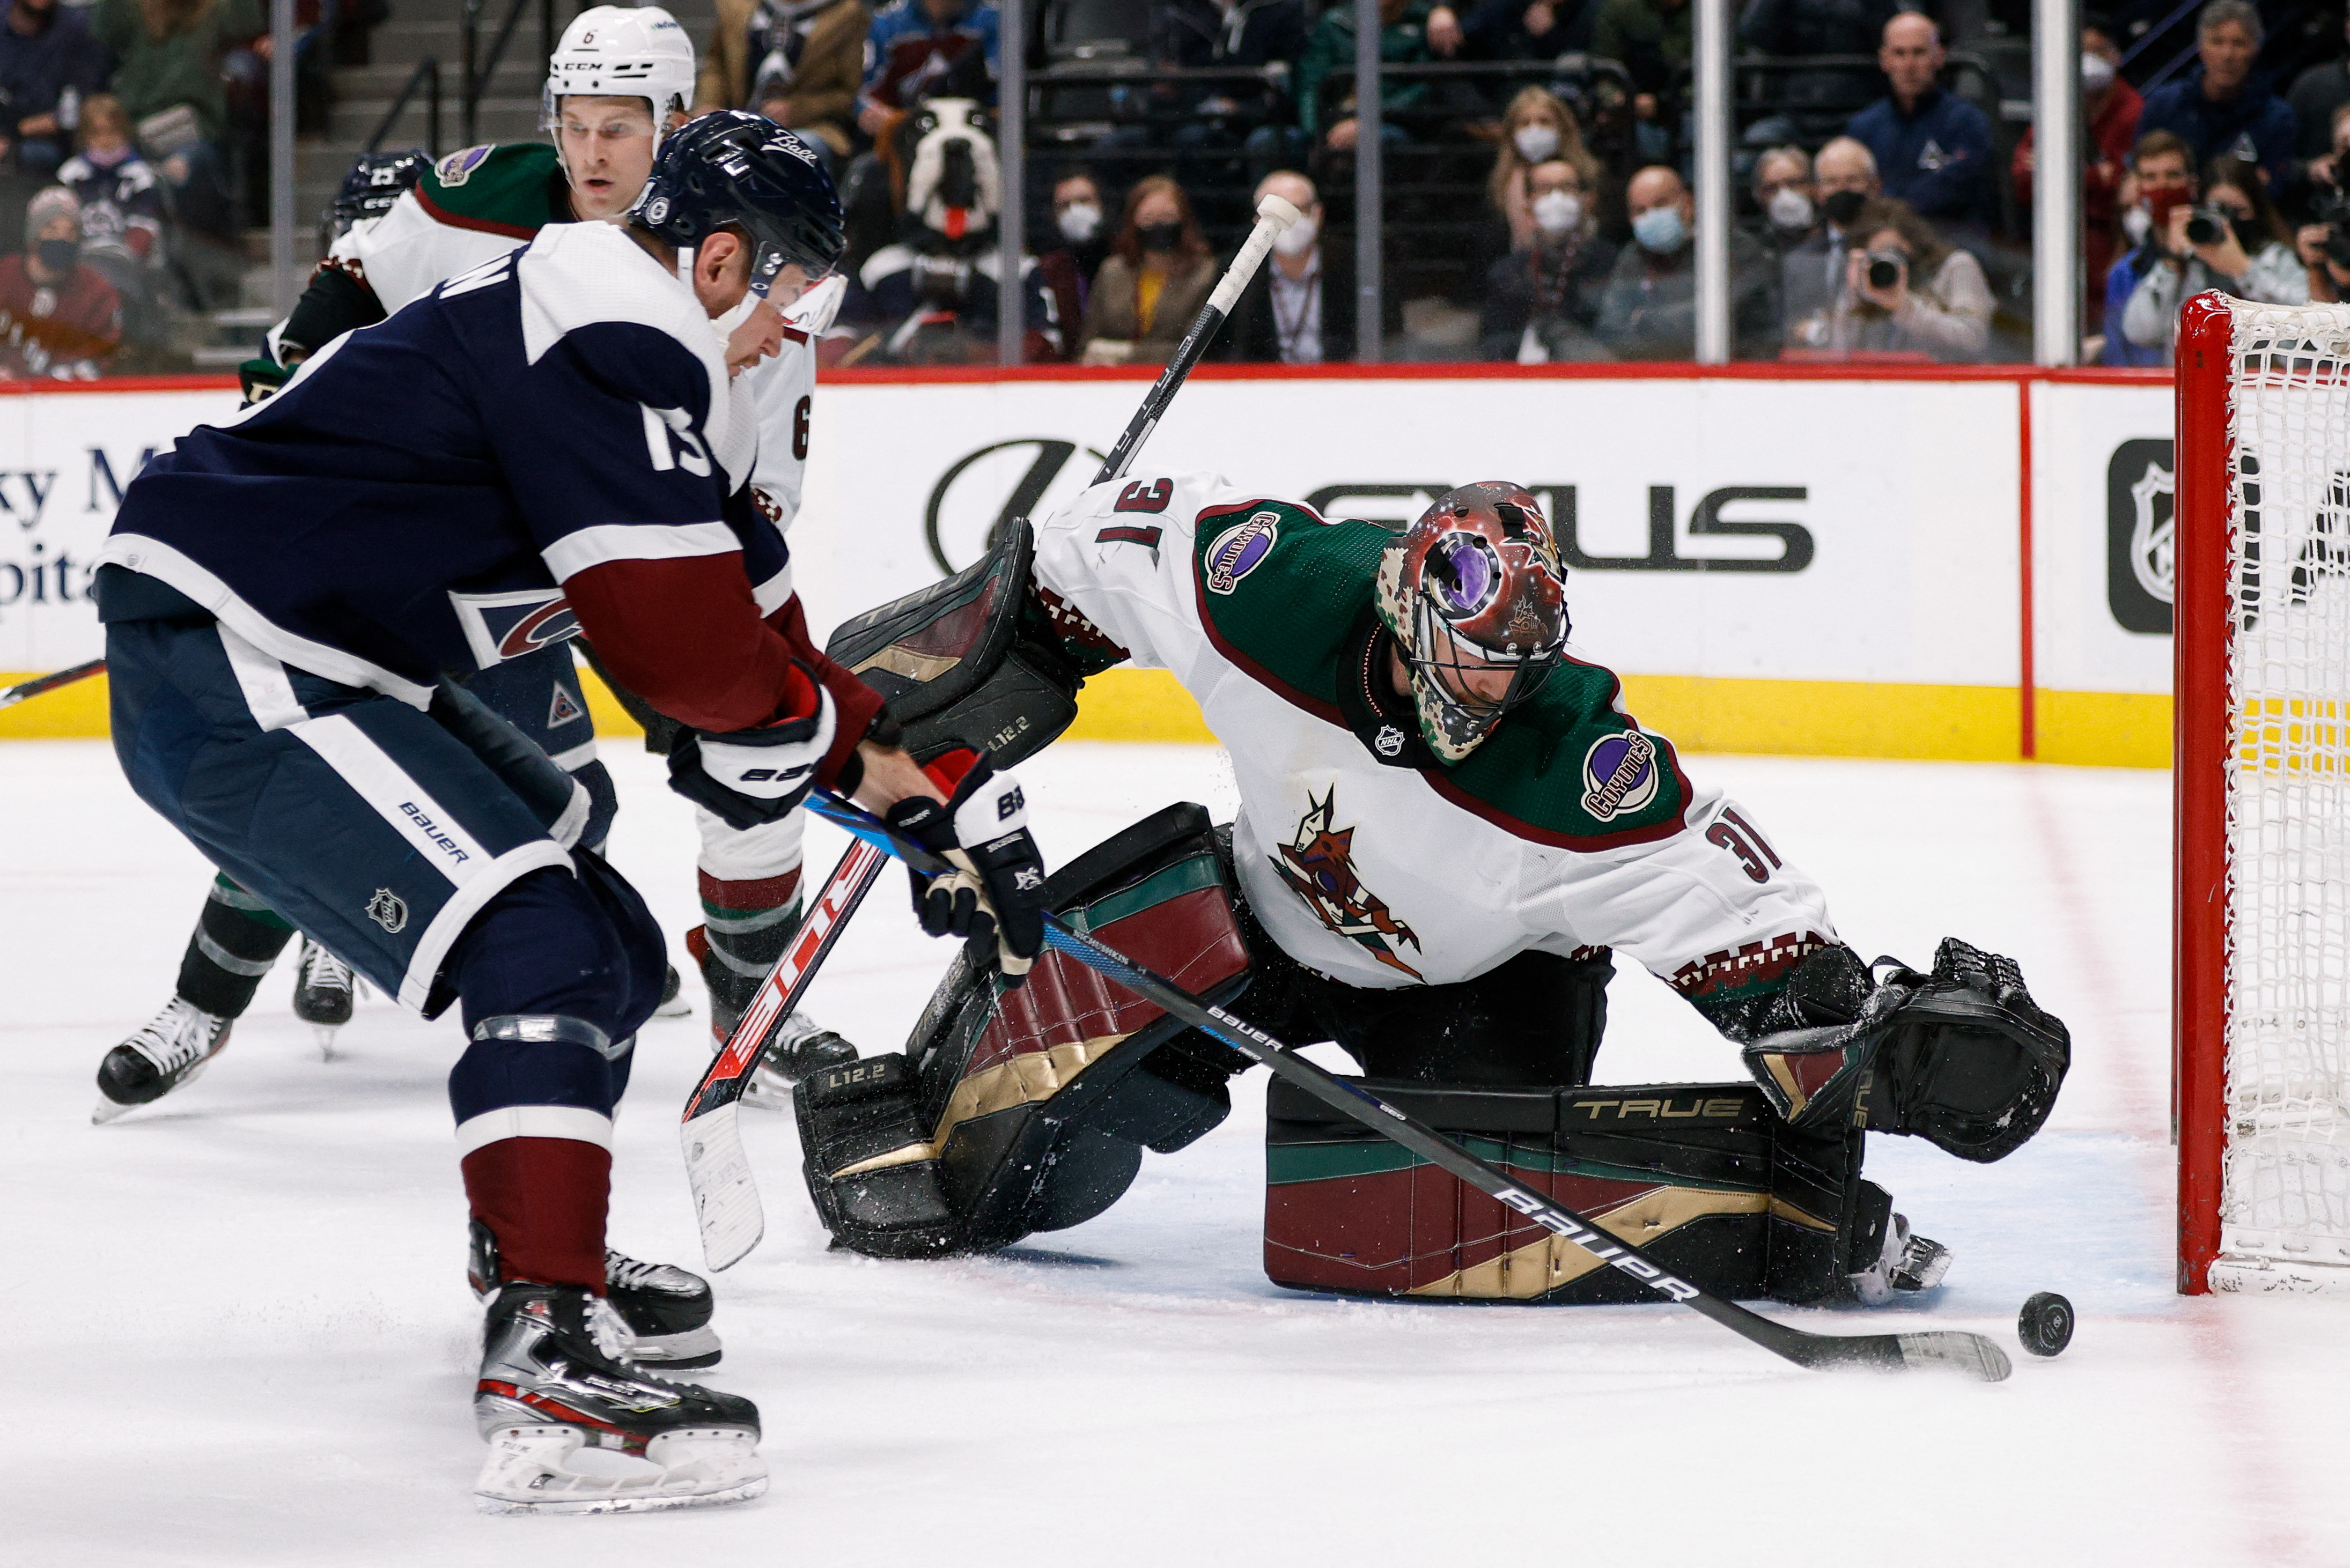 Coyotes Trade Scott Wedgewood to Dallas for Draft Pick - The